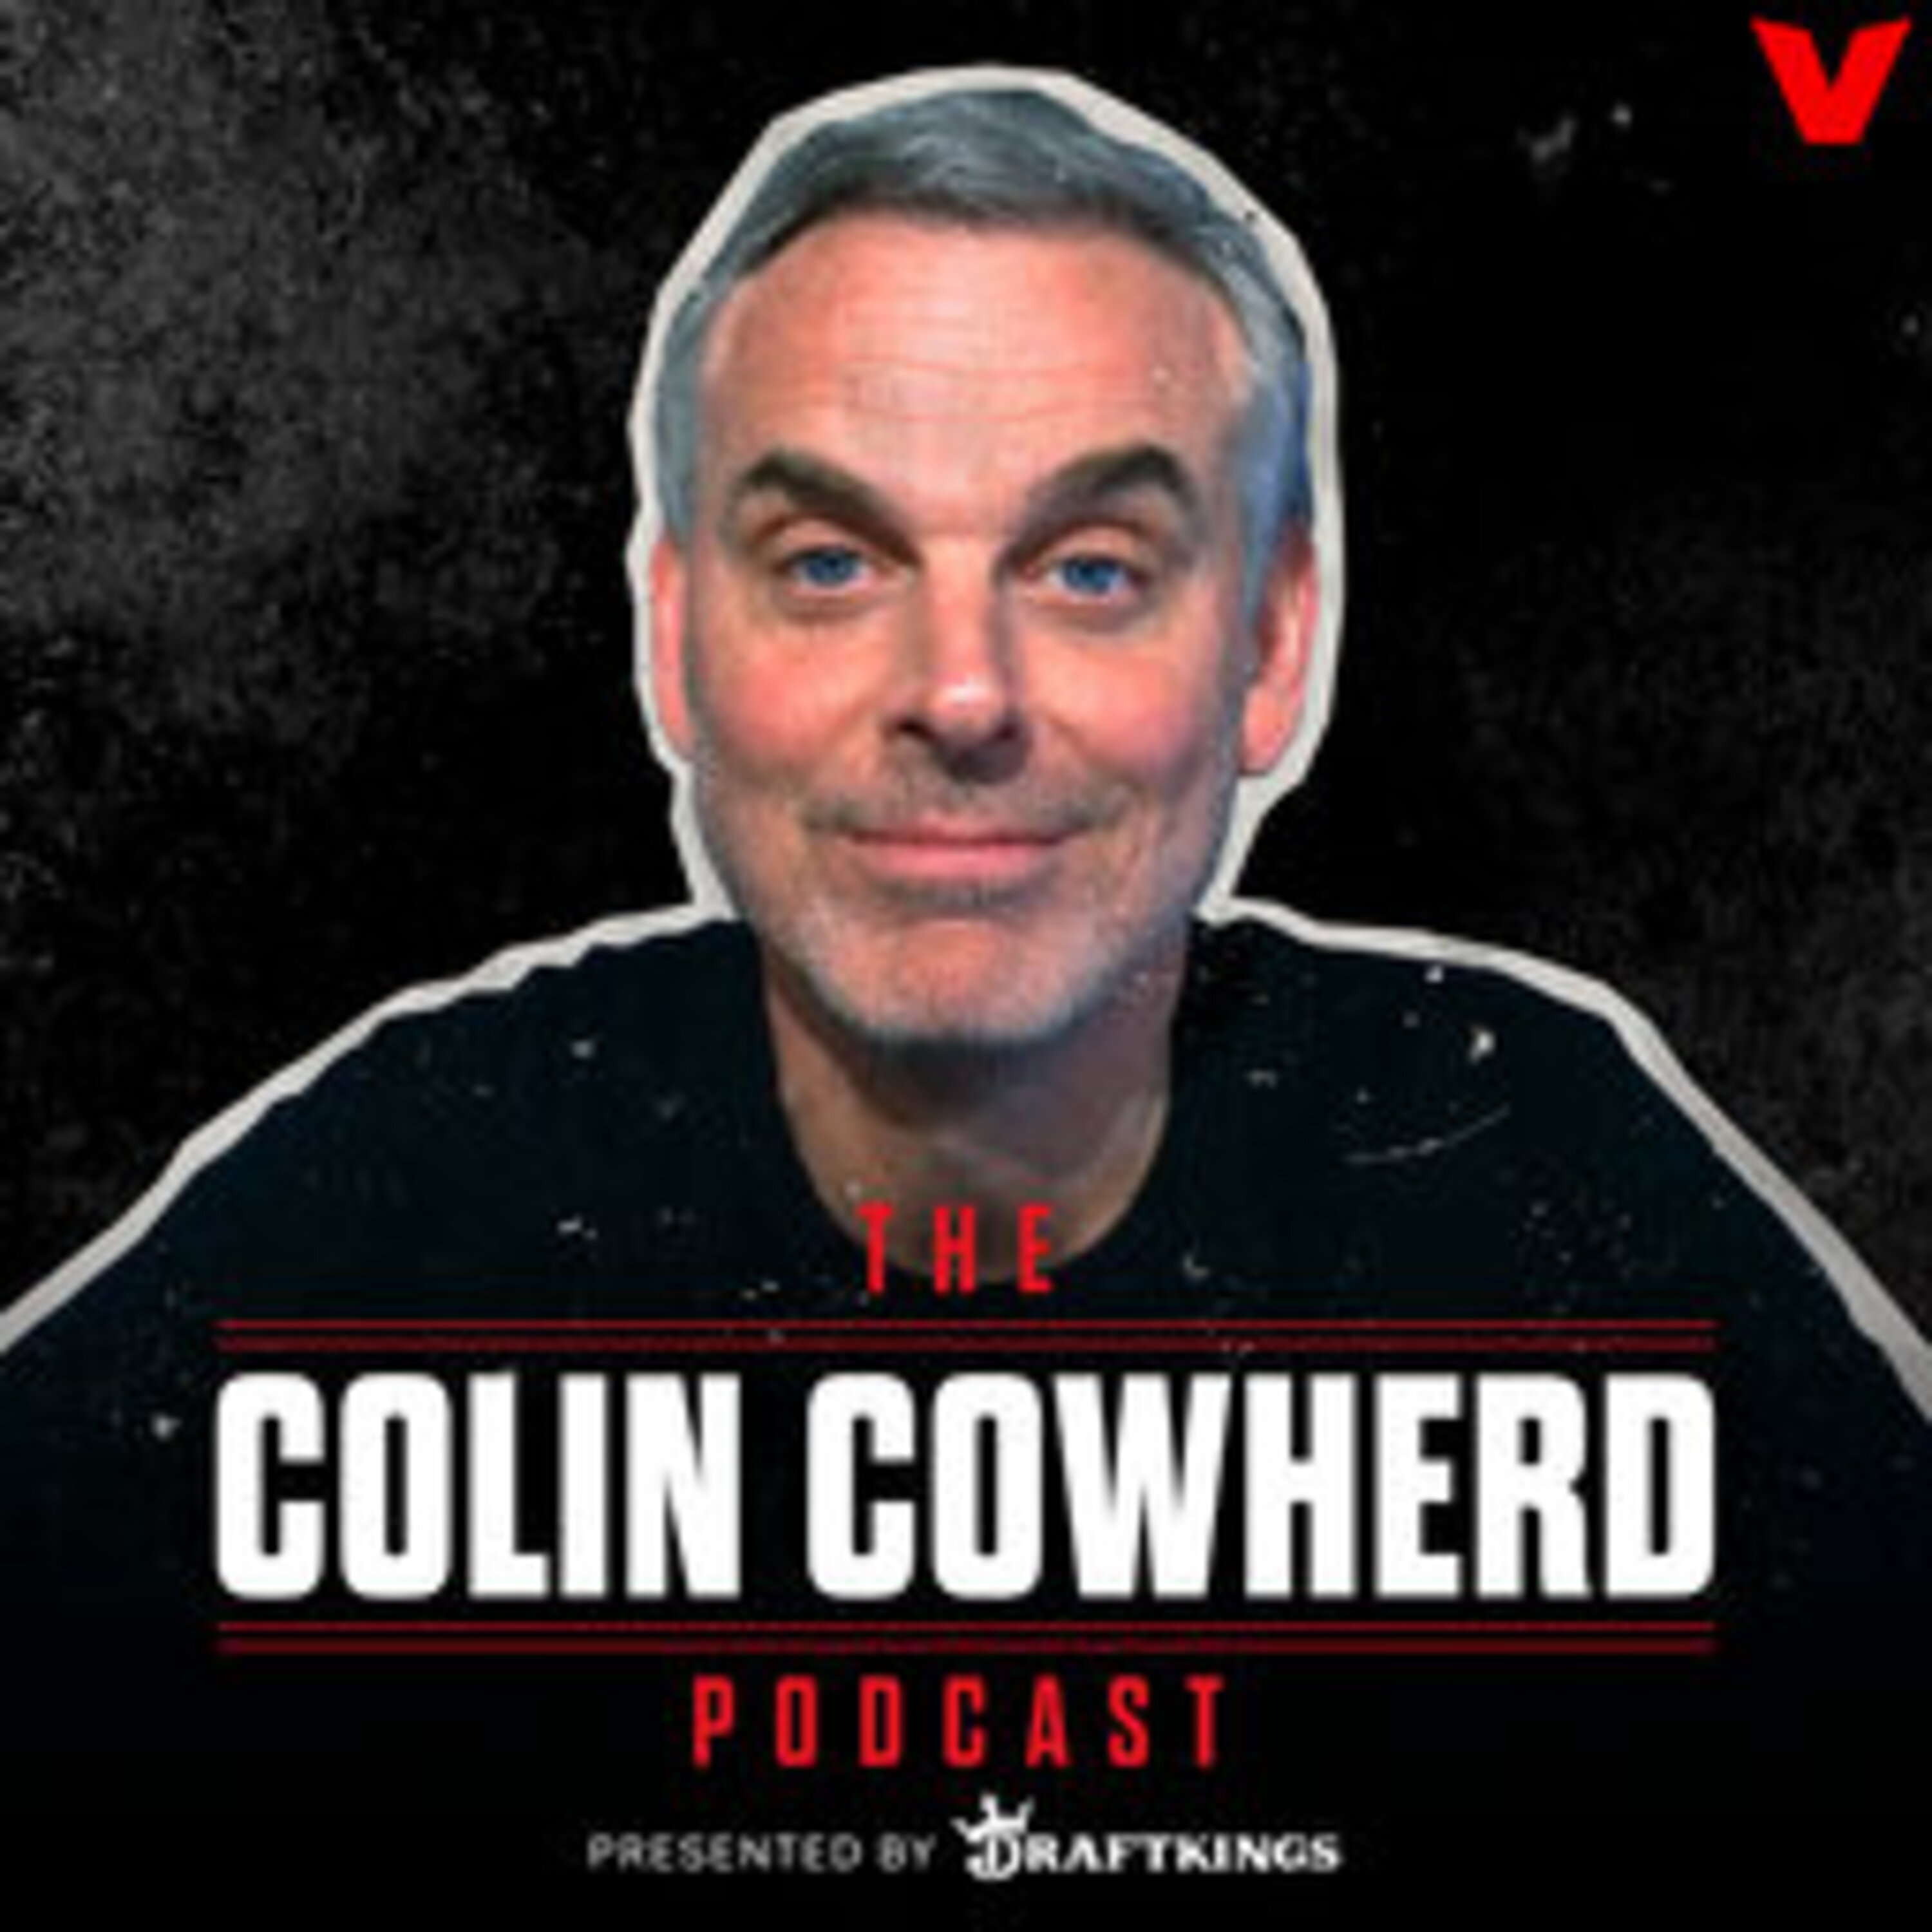 Colin Cowherd Podcast - Luka For MVP? NBA Playoff Picks, Warriors Dynasty Is Over, Will Celtics Run Through The East?